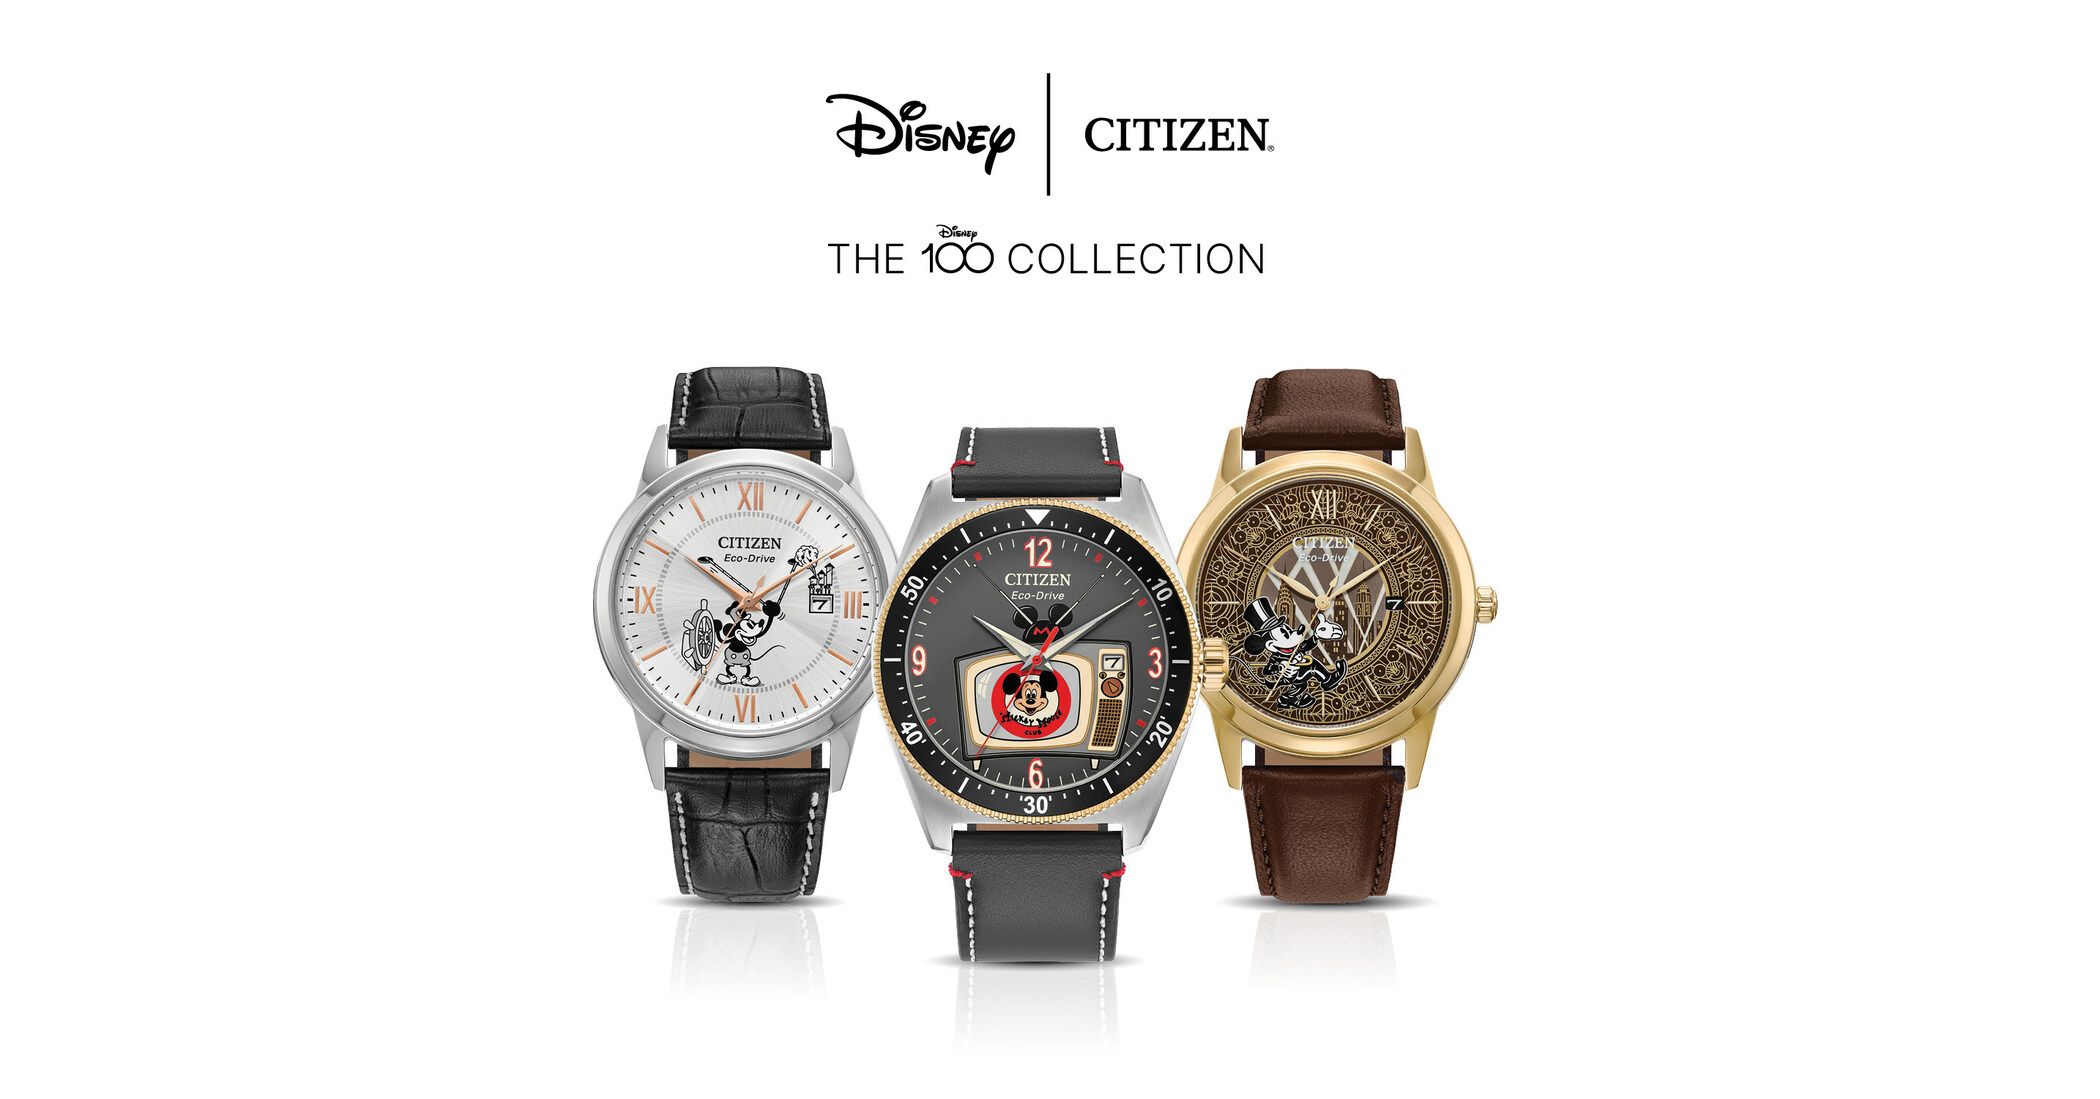 Seiko launches limited-edition products to commemorate Disney′s